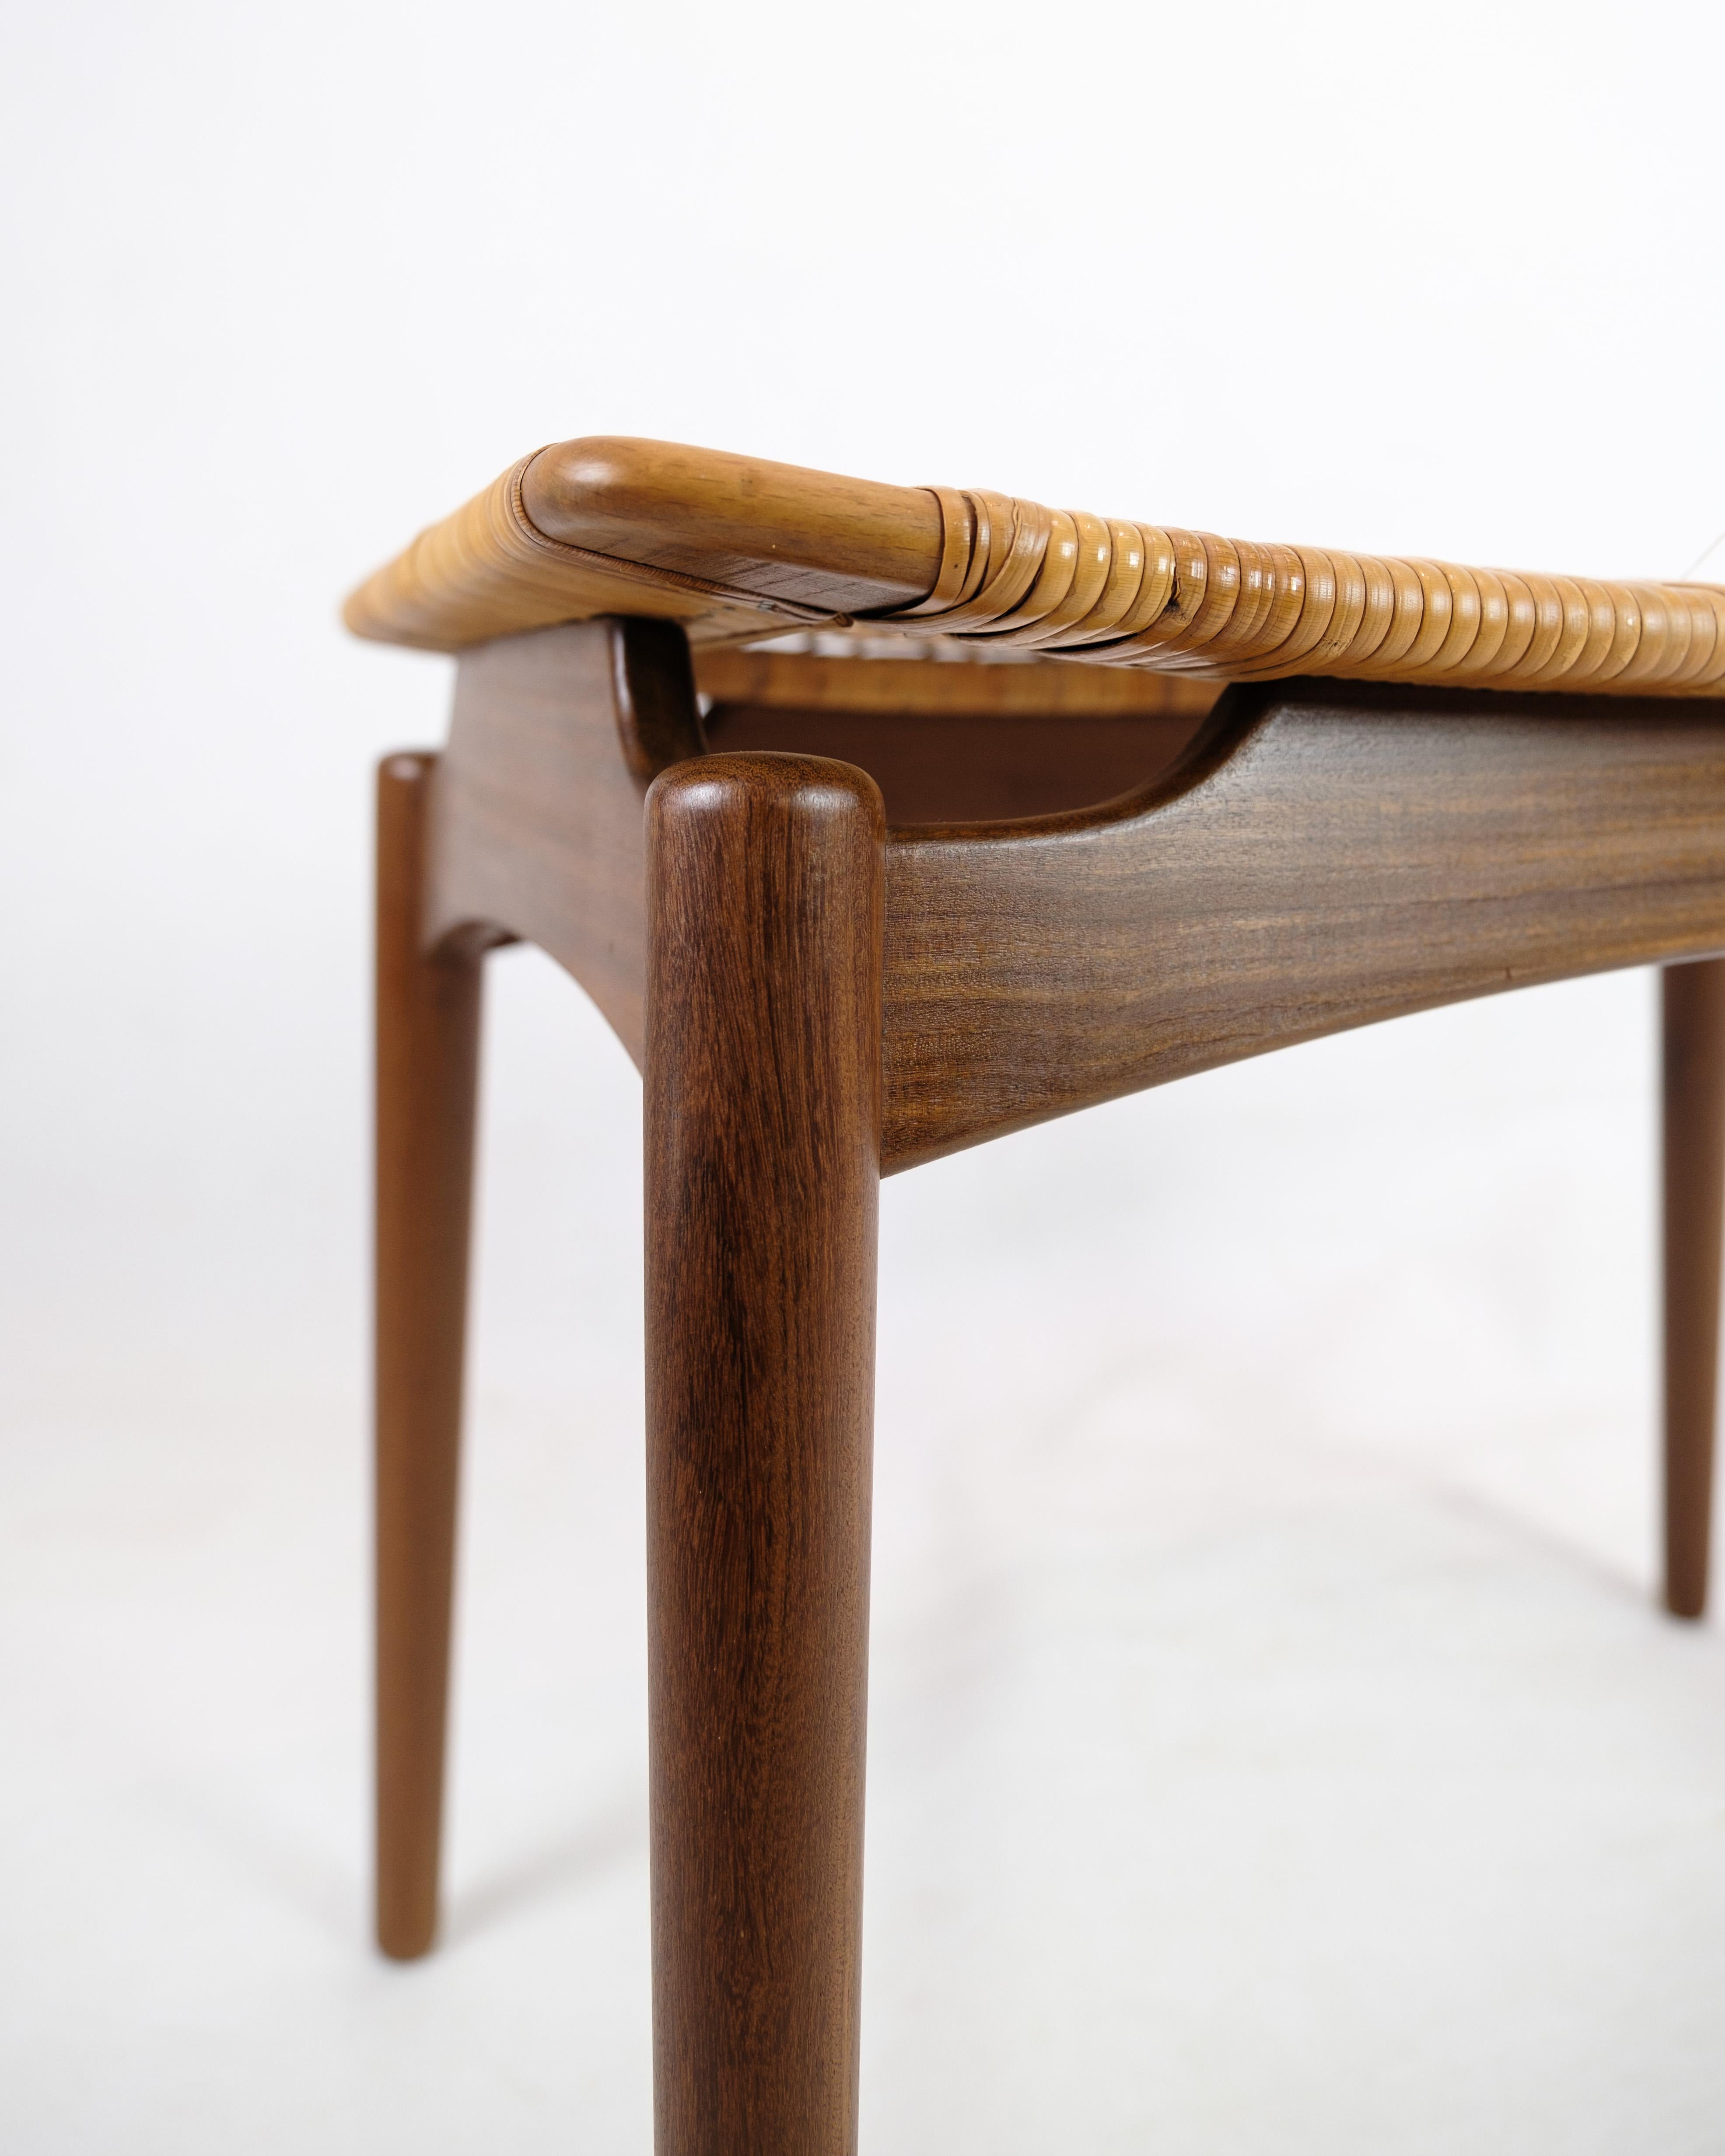 Mid-20th Century Papercord / Cane Footstools in Teak Wood By Sigfred Omann For Ølholm Furniture  For Sale